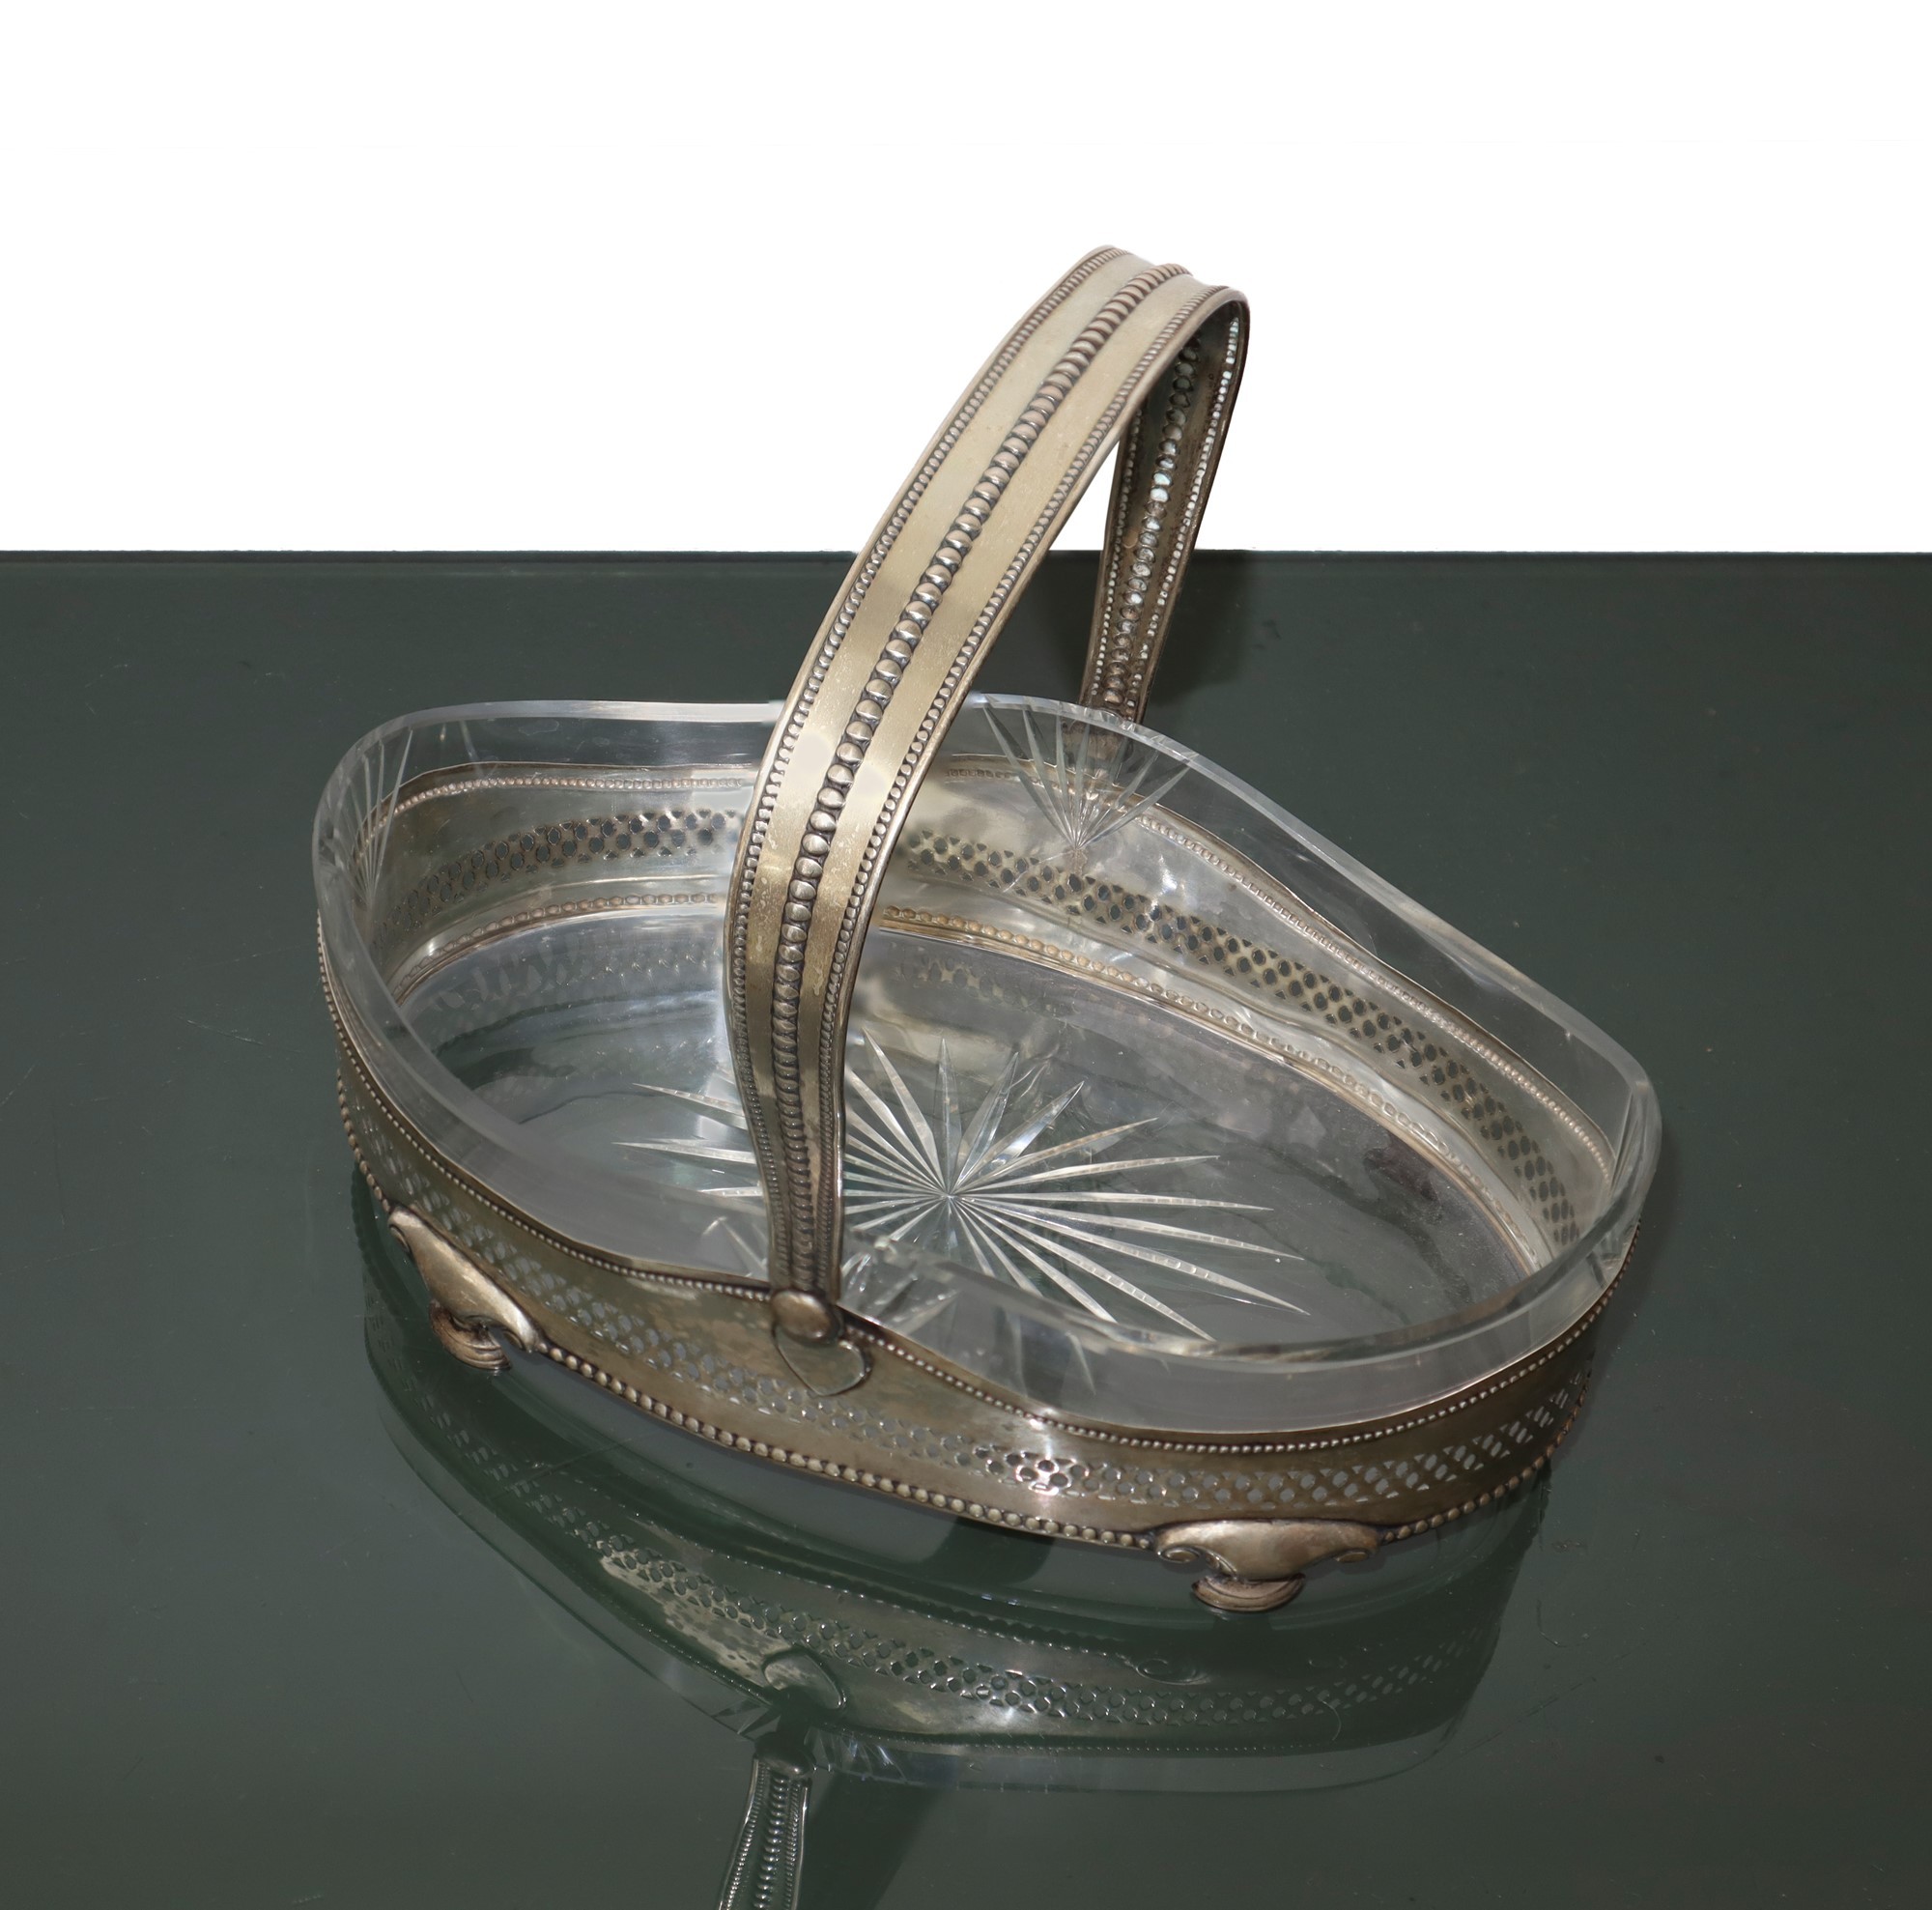 Sweets holder in silver, Decò, 1930s - Image 4 of 5